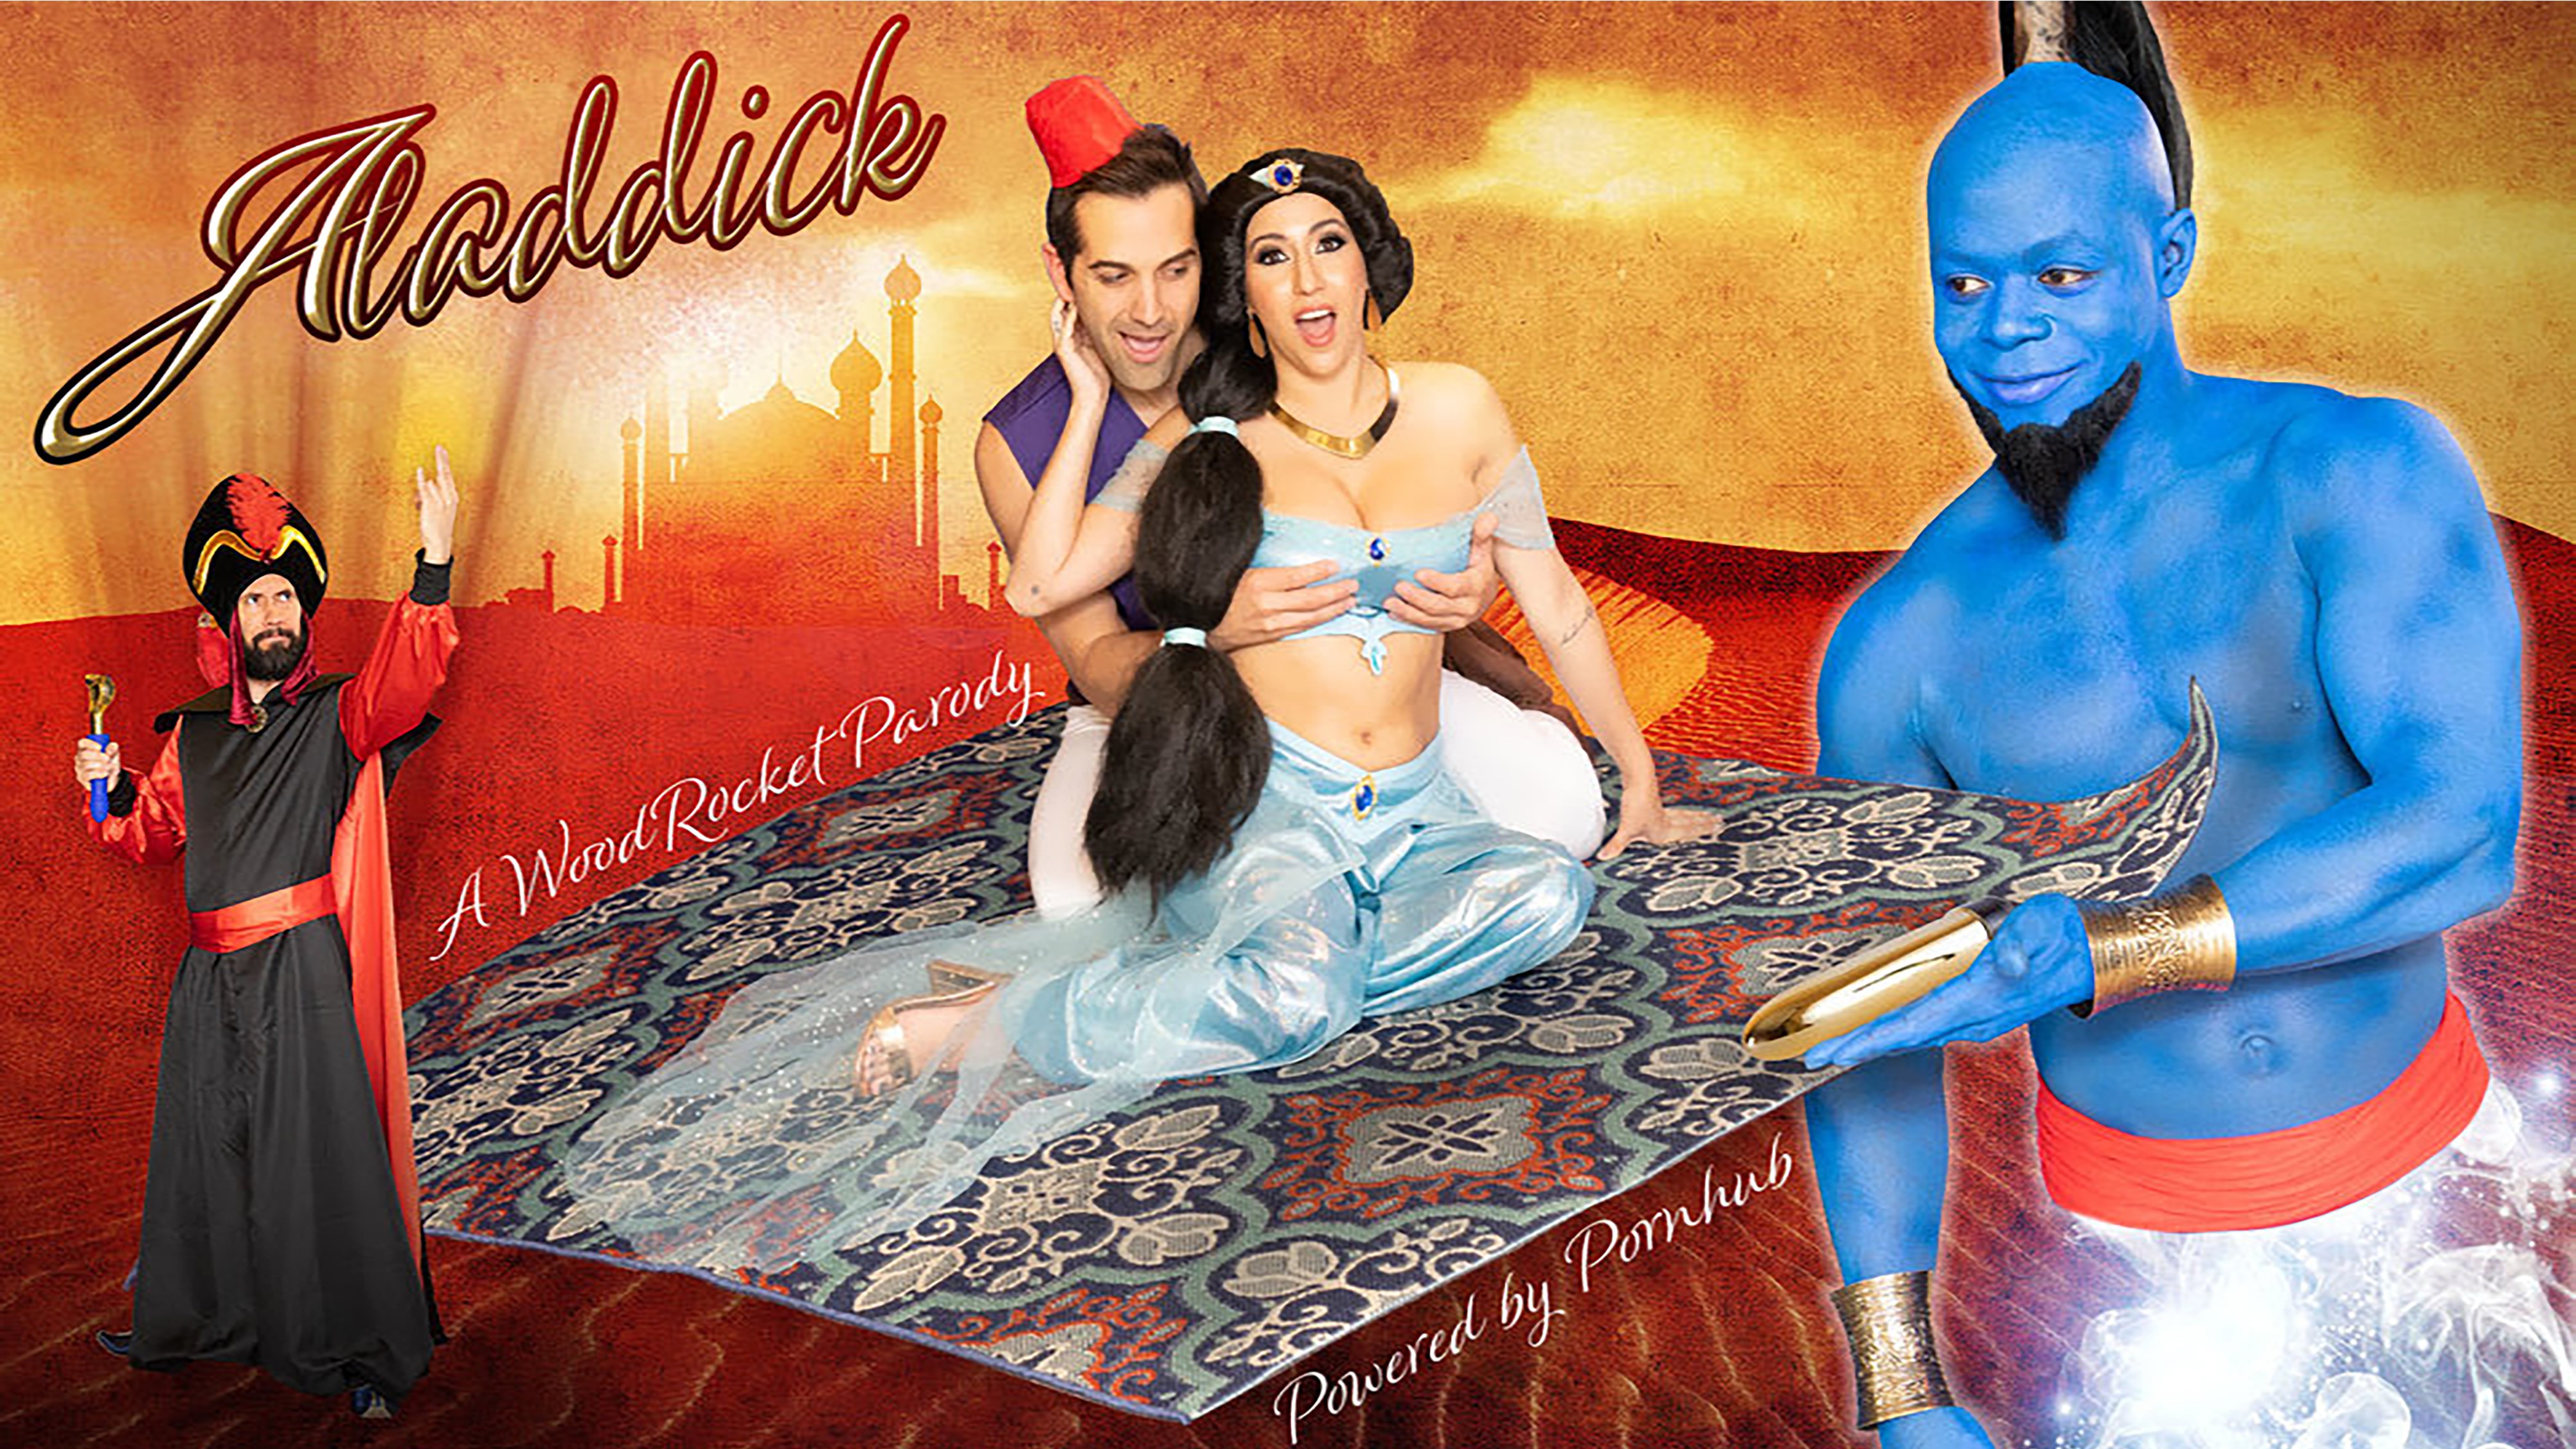 Aladdin Erotic - The 'Aladdin' Porn Parody Is Here and We Fixed Its Title